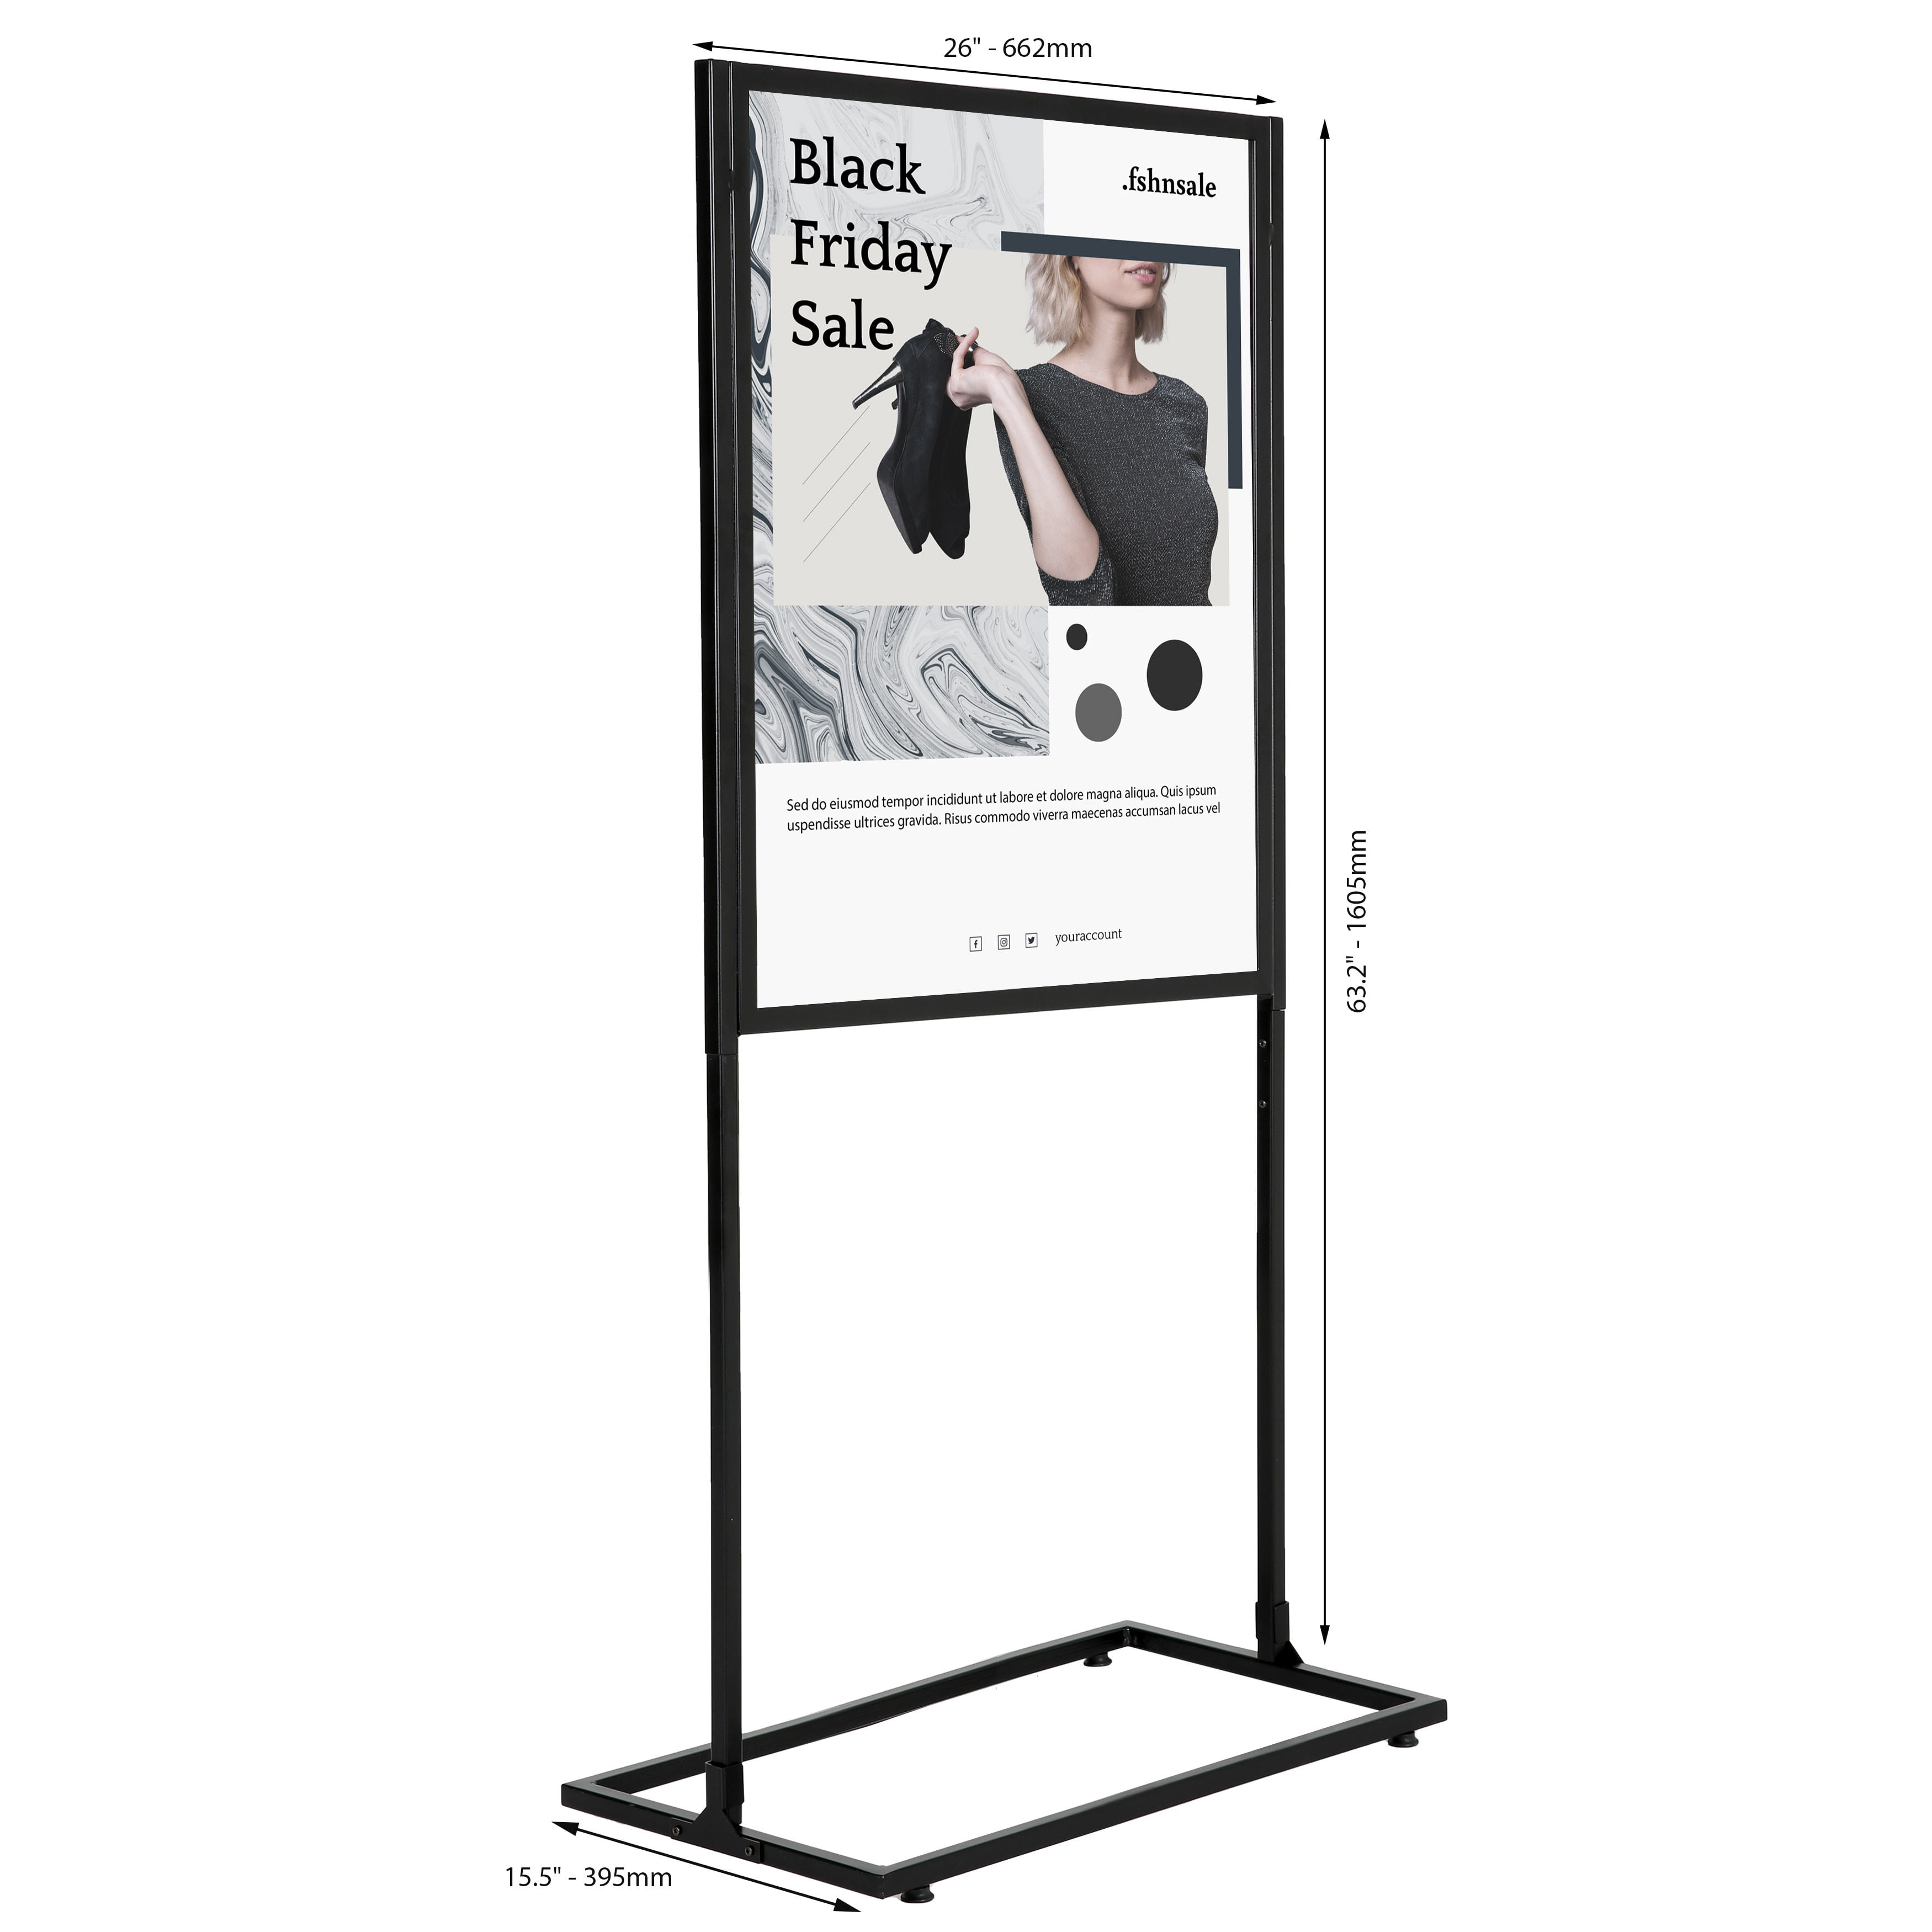 M&T Displays Metal Eco Info Board, Black 24x36 Inches Slide-In